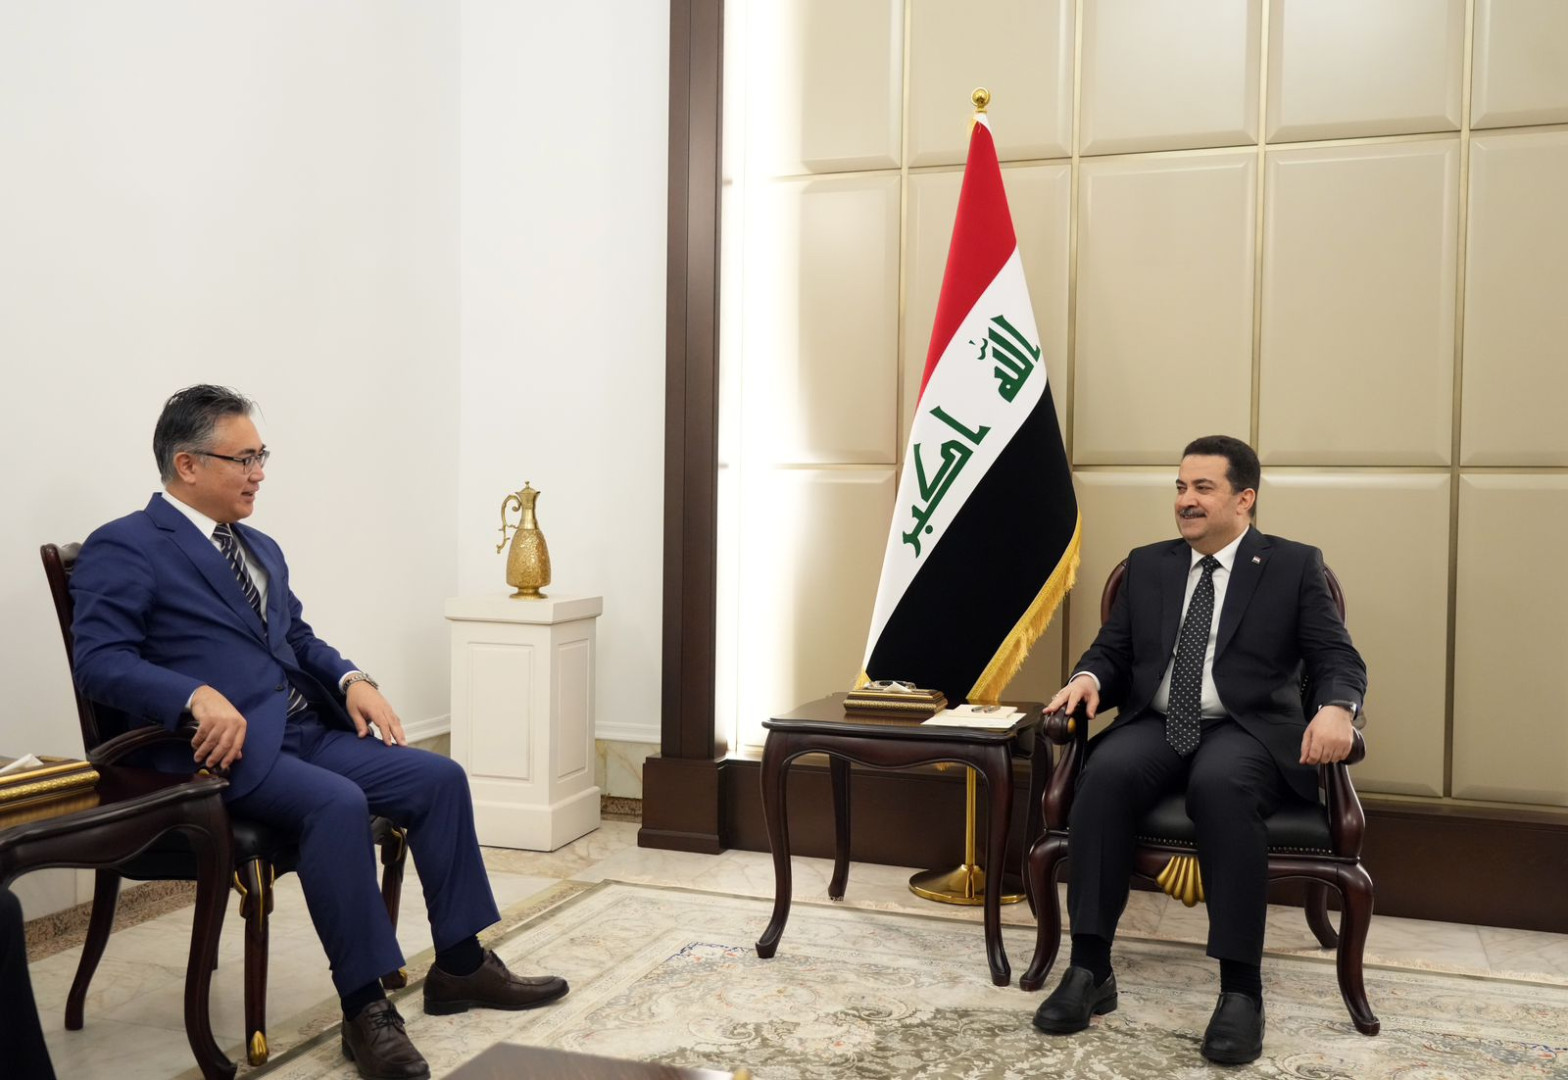 Iraq seeks to benefit from Japanese expertise in infrastructure development